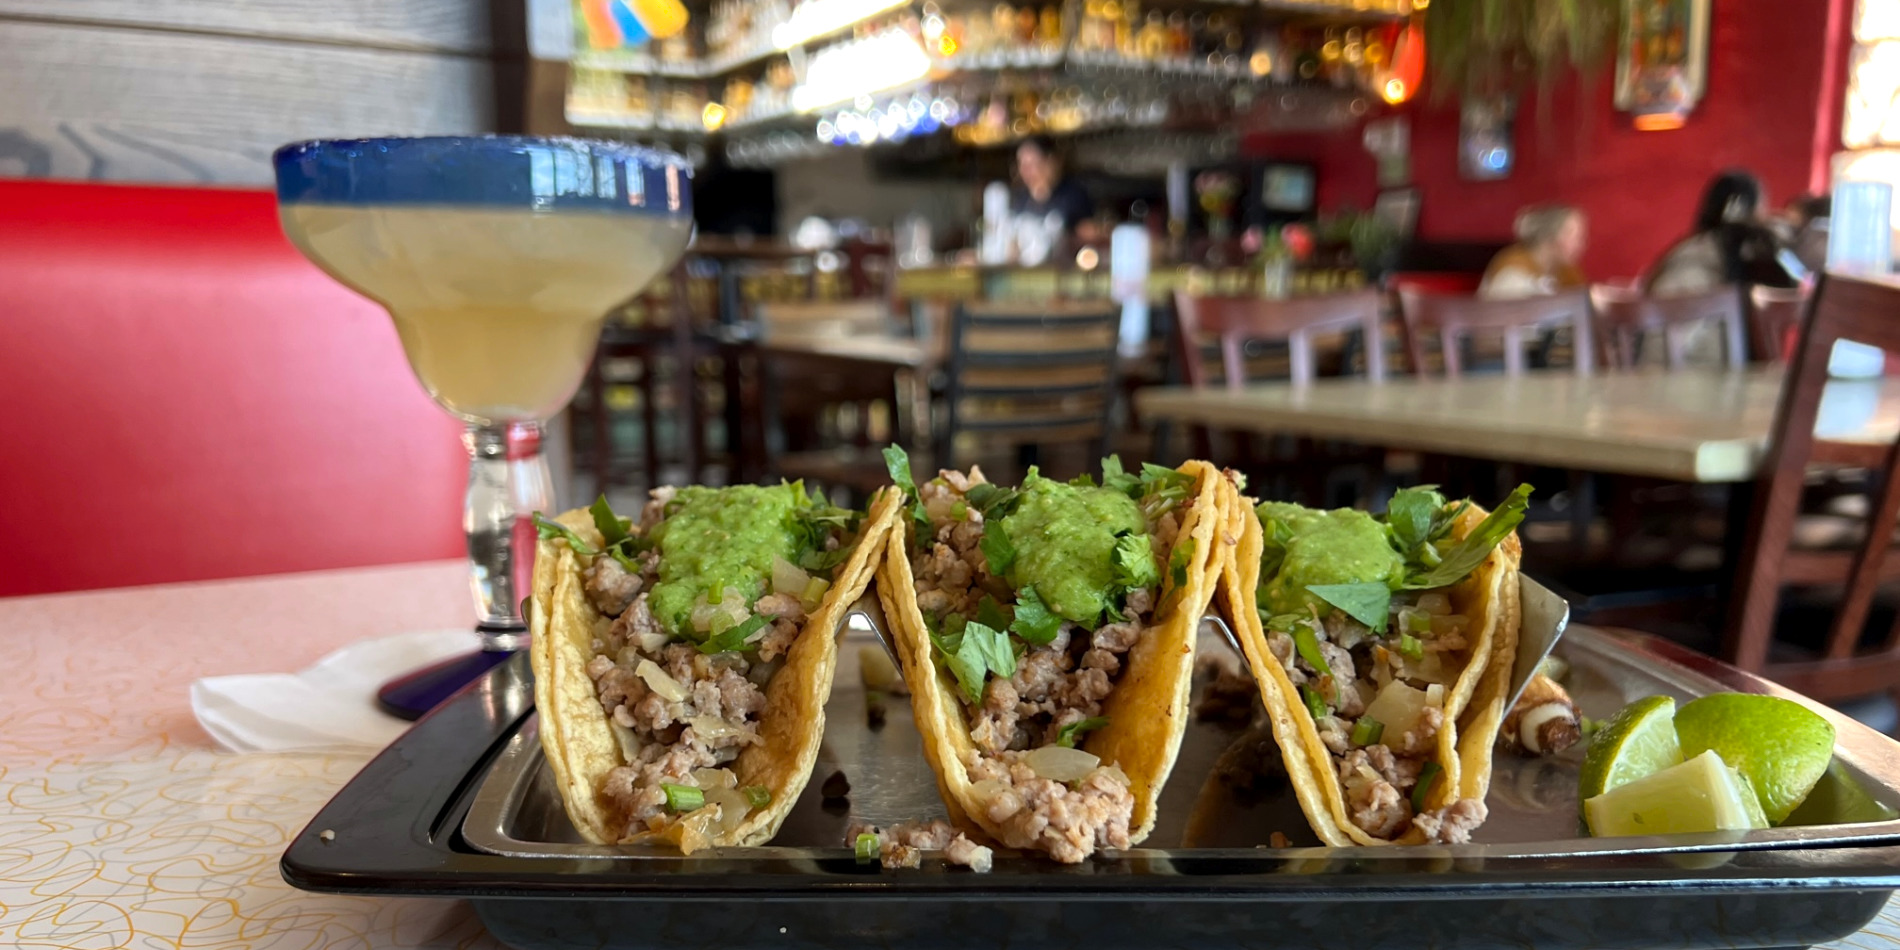 Three Alex tacos with a margarita sit on a table inside Fiesta Cafe in Champaign. Photo by Alyssa Buckley.